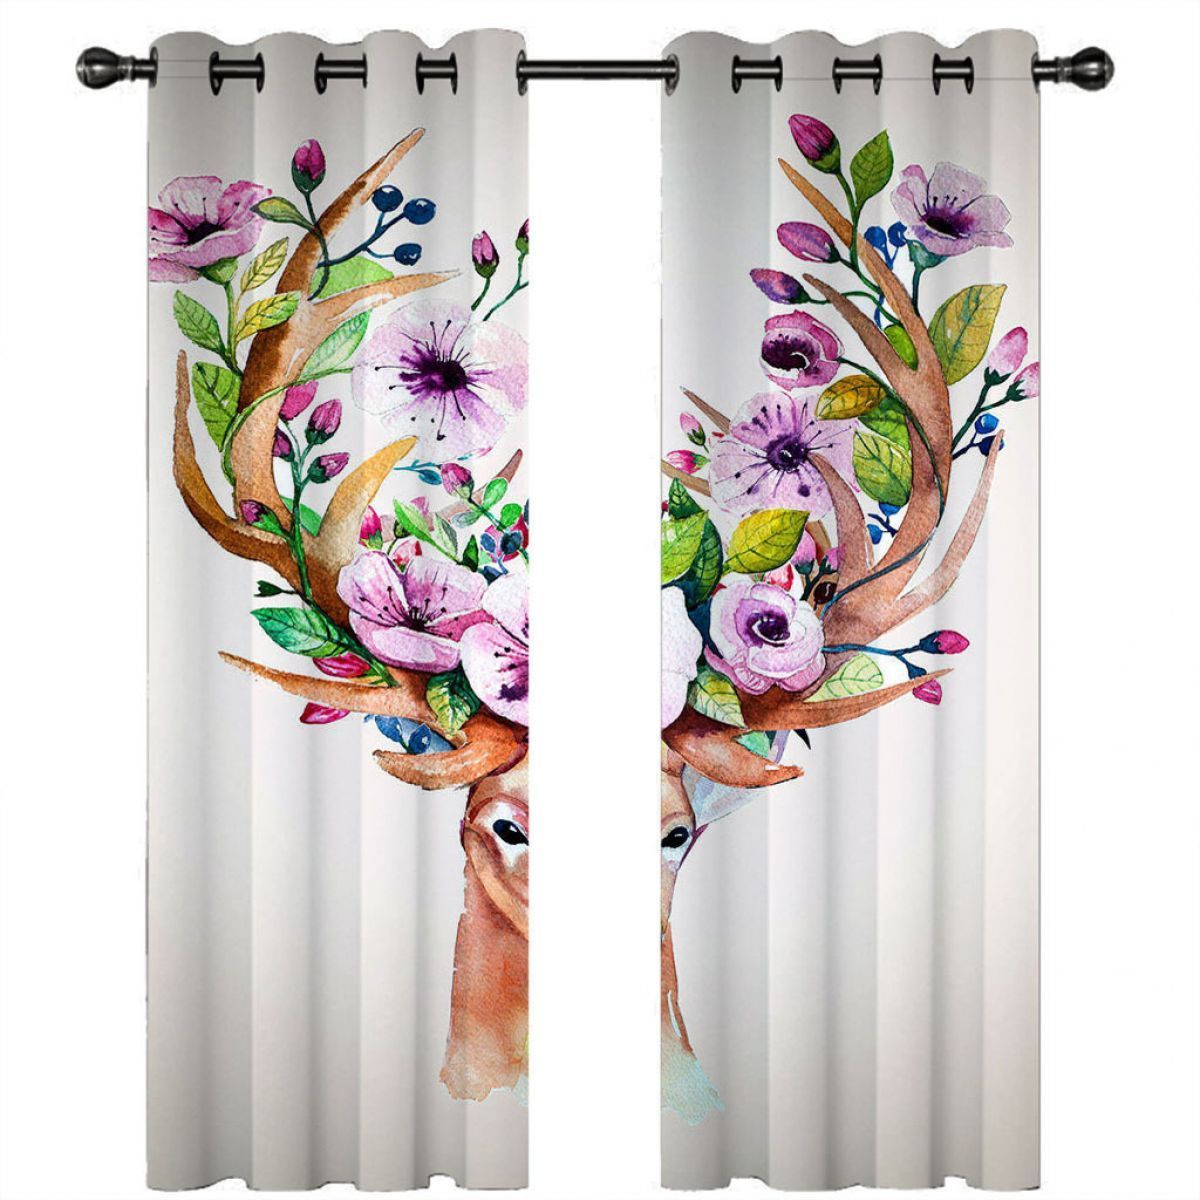 elk and flowers printed window curtain home decor 3037